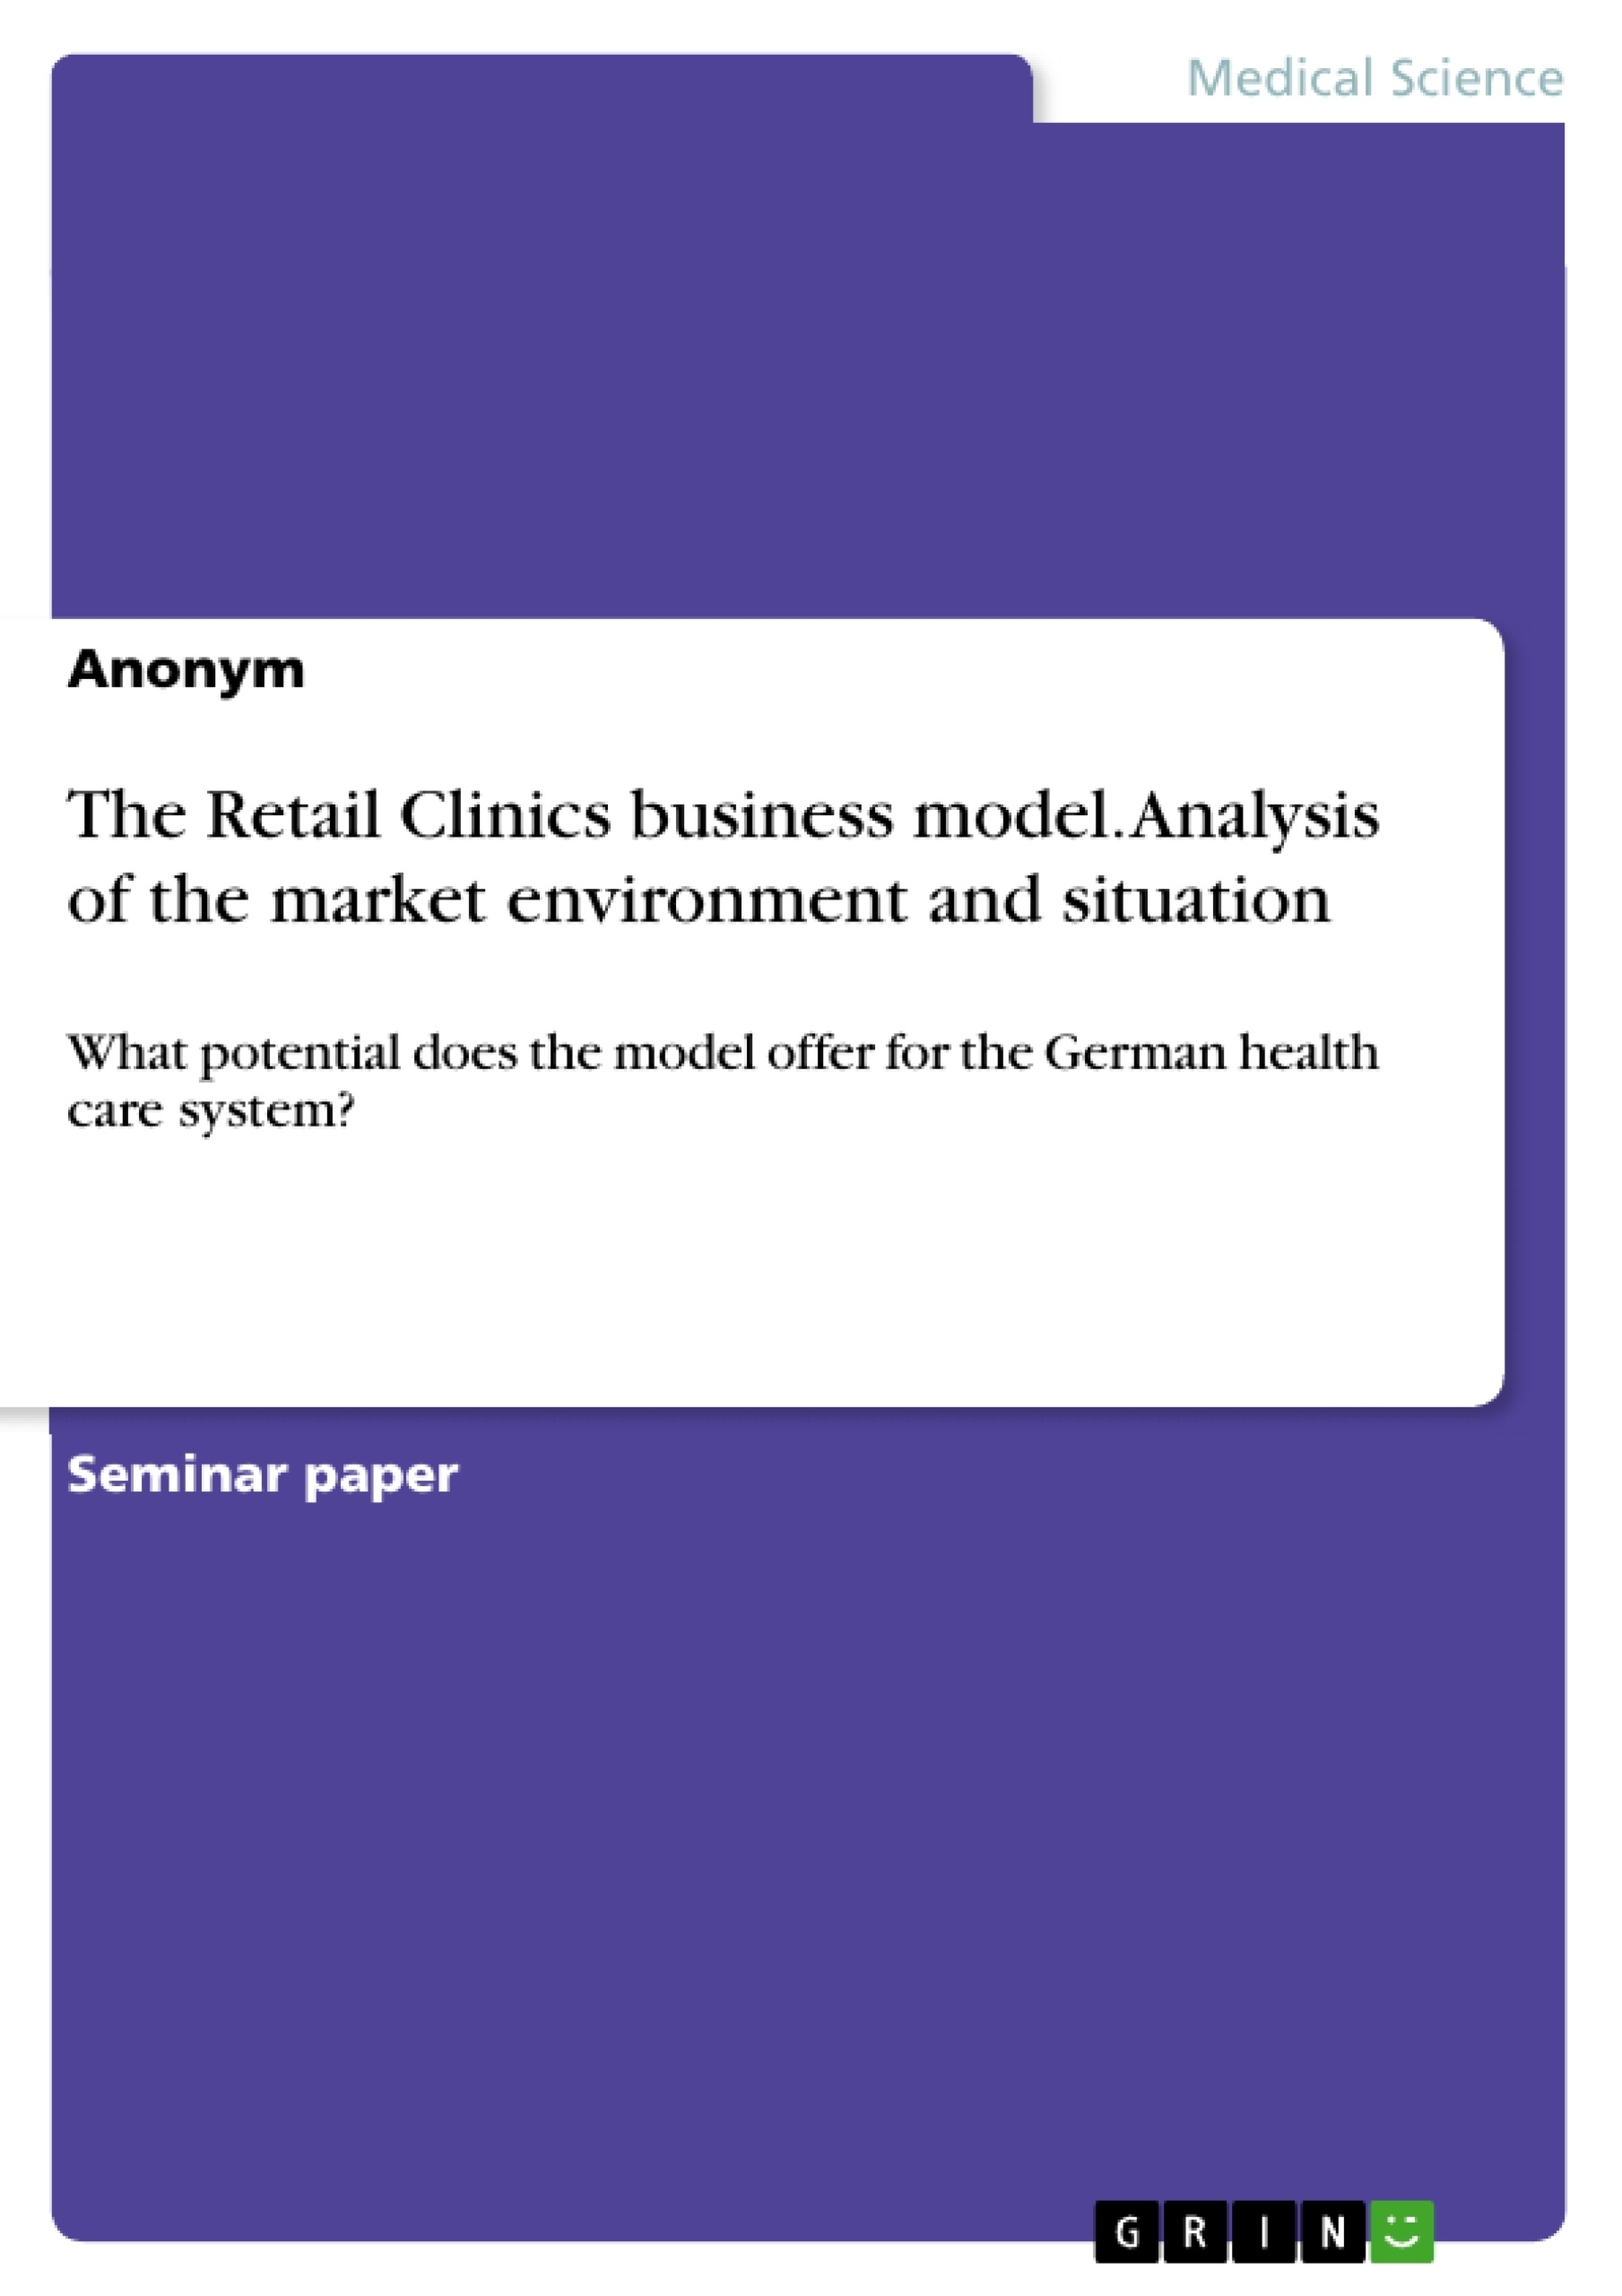 Titre: The Retail Clinics business model. Analysis of the market environment and situation